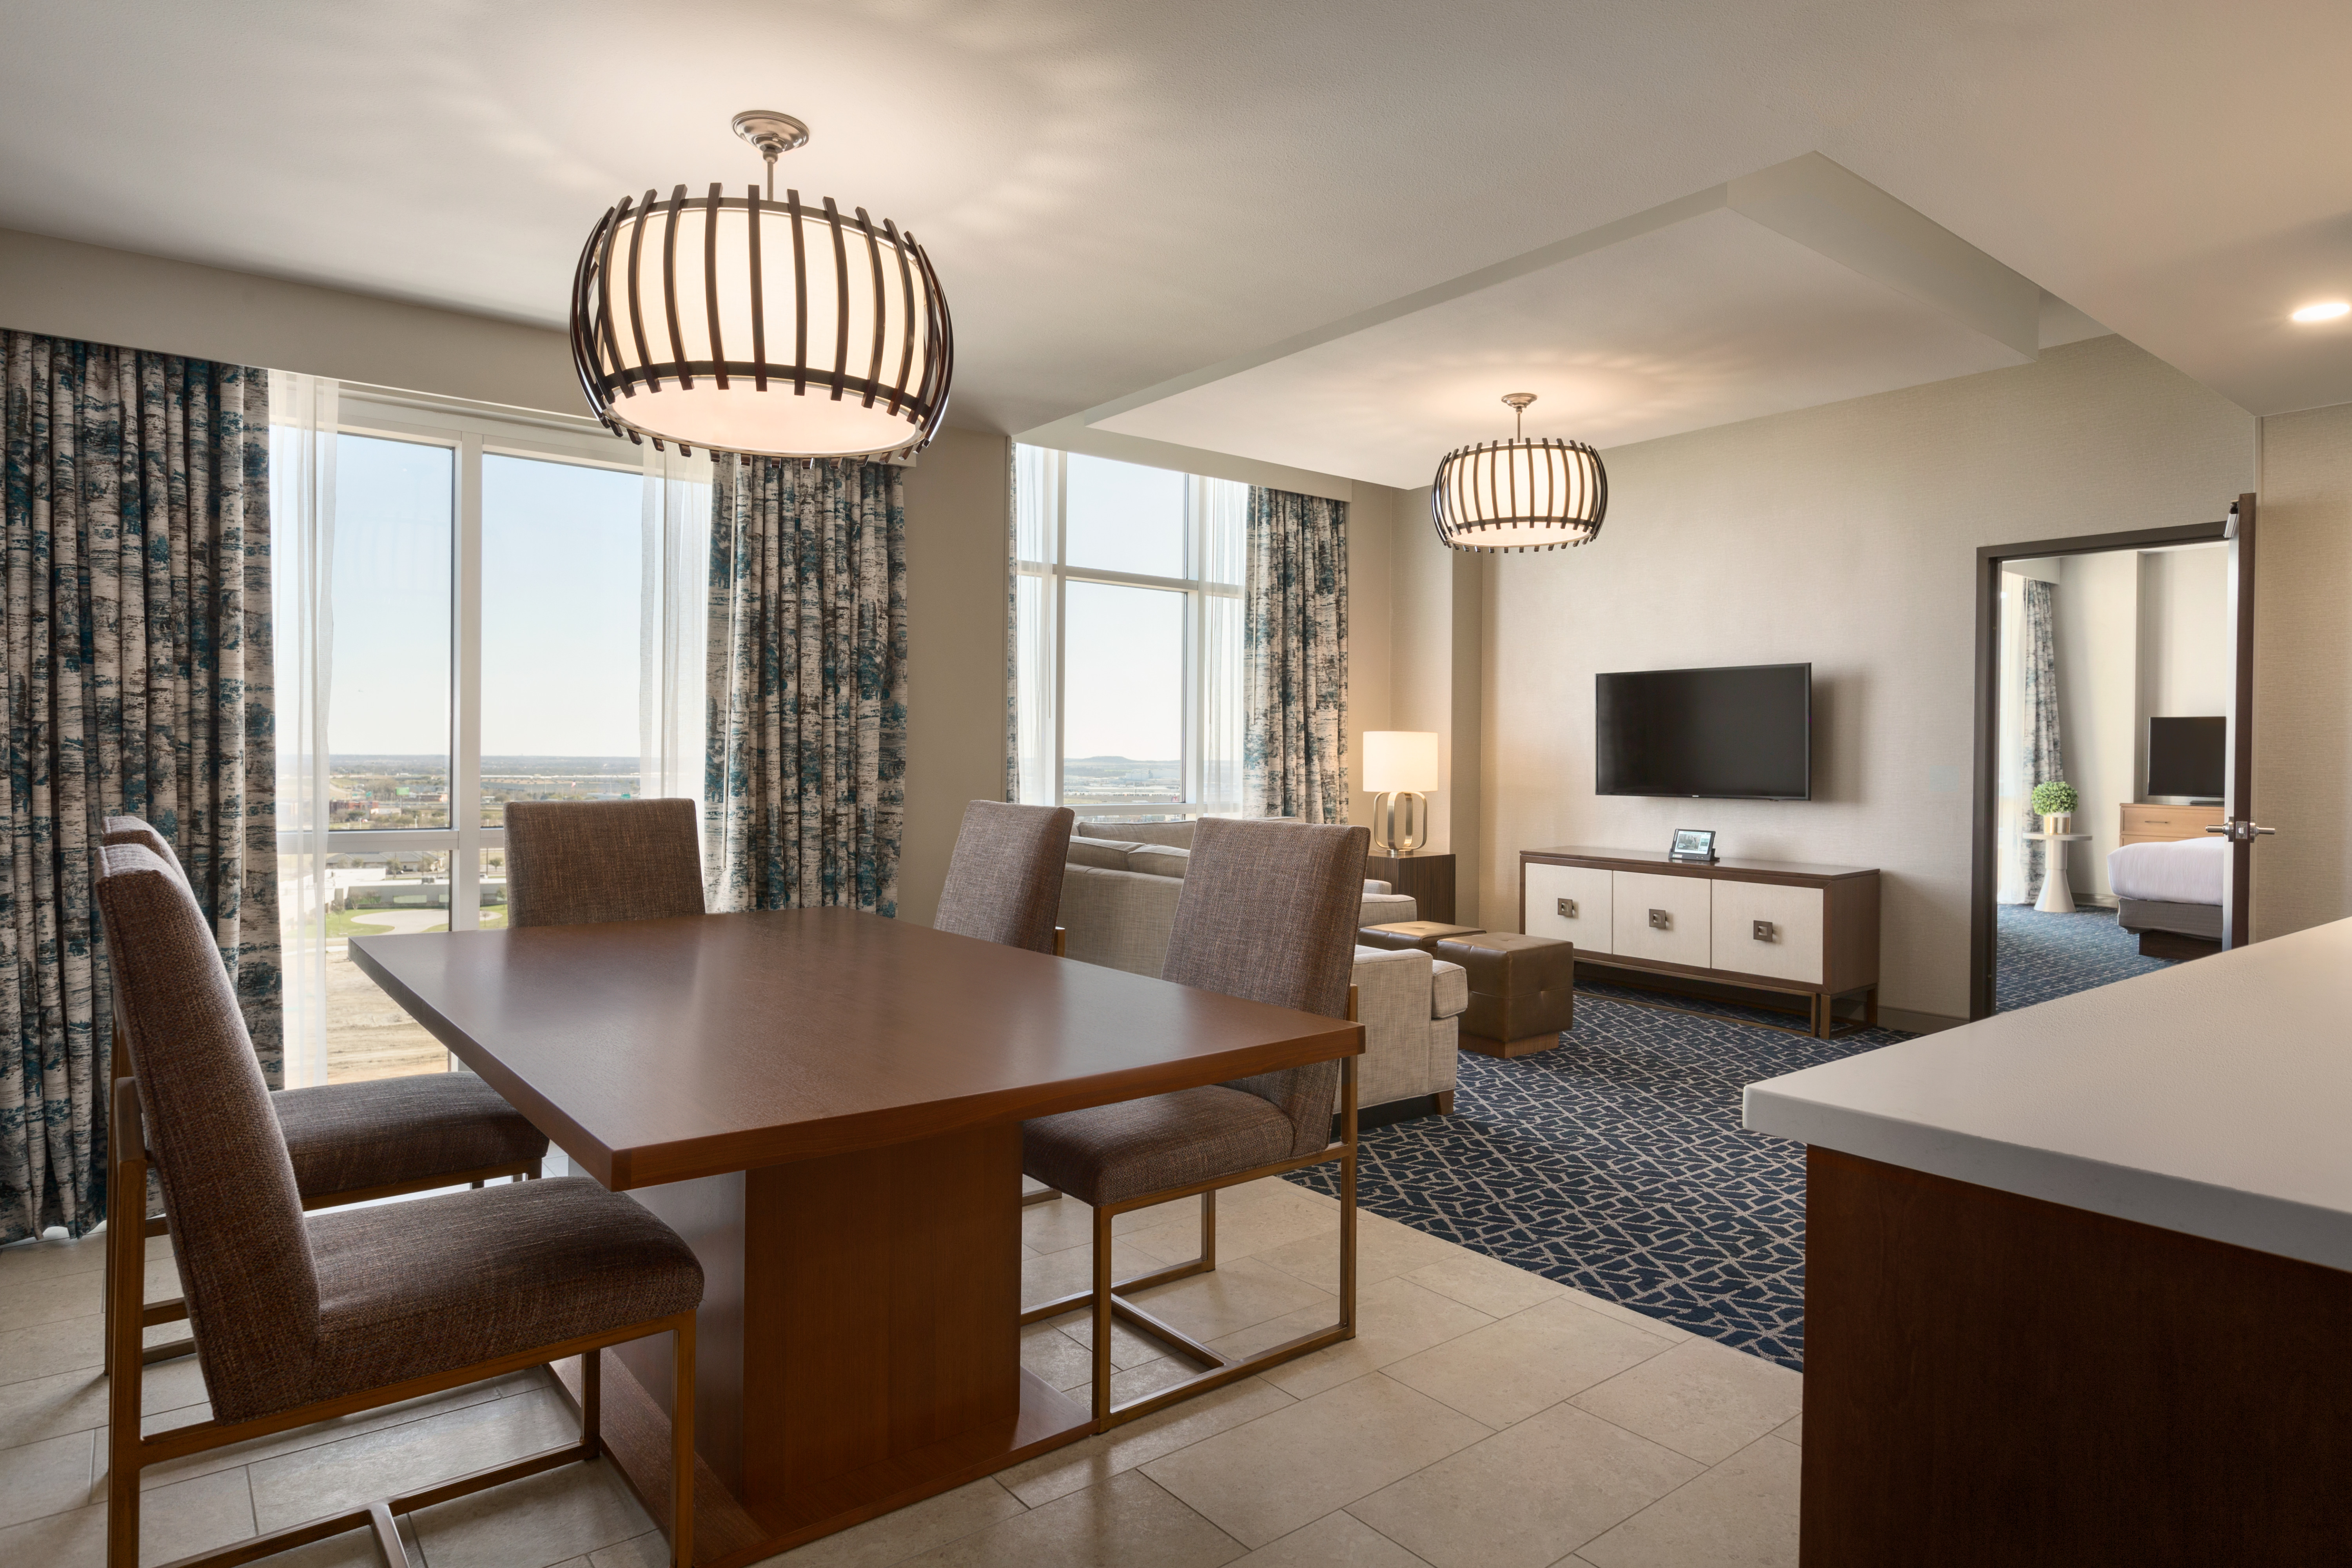 Presidential Suite Living Room Area with Sofa HDTV Table and Chairs